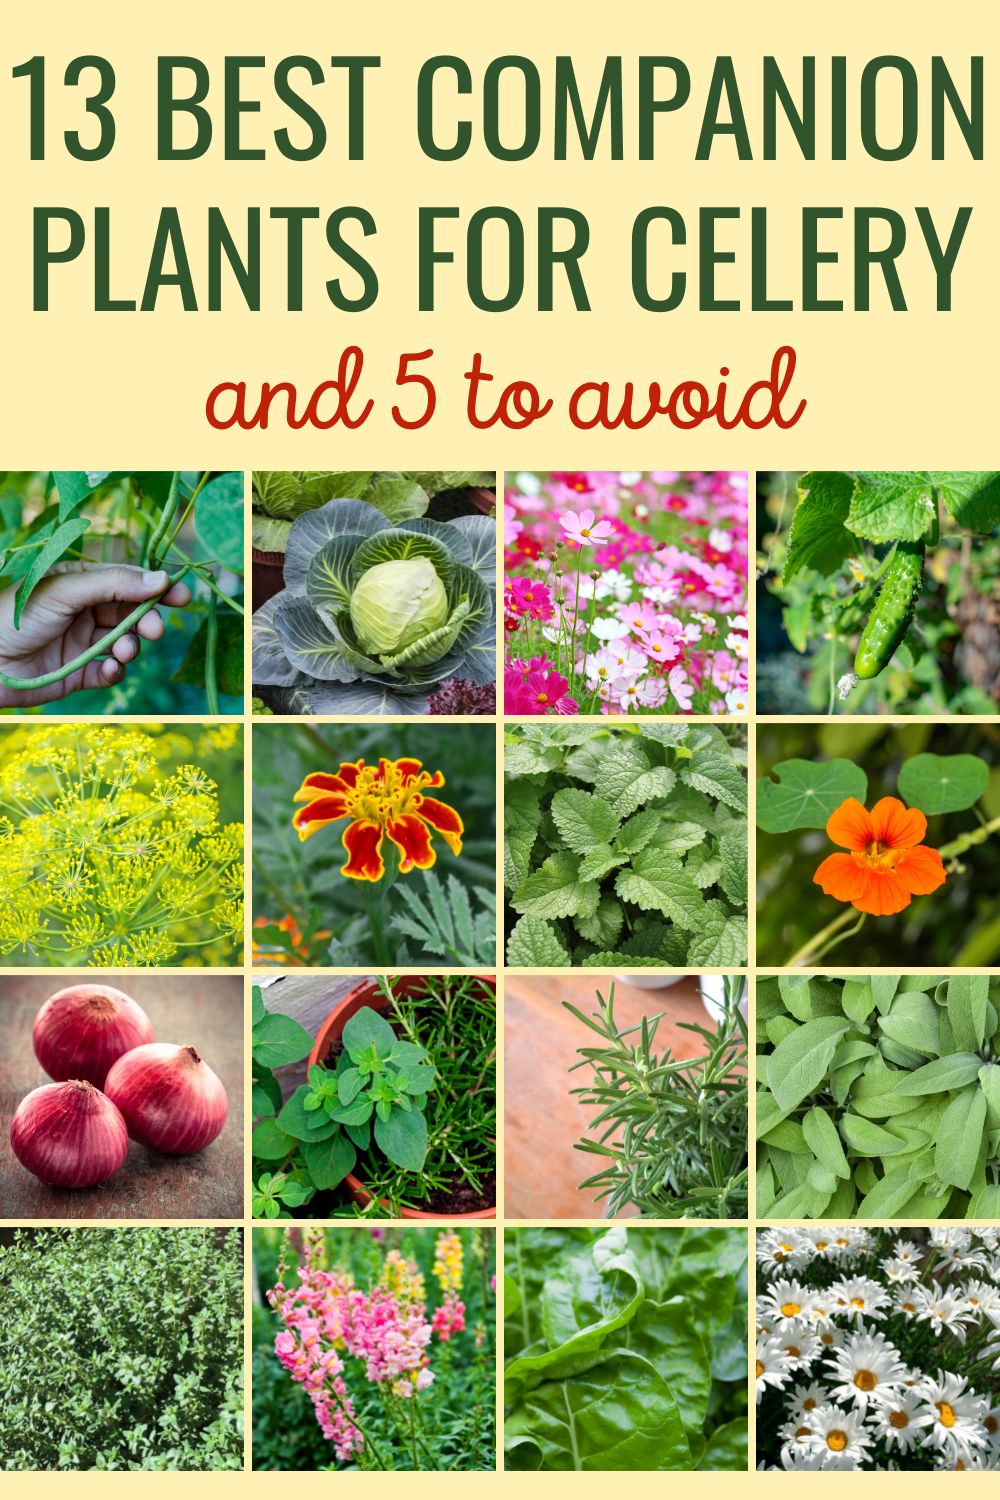 13 best companion plants for celery (and 5 to avoid)